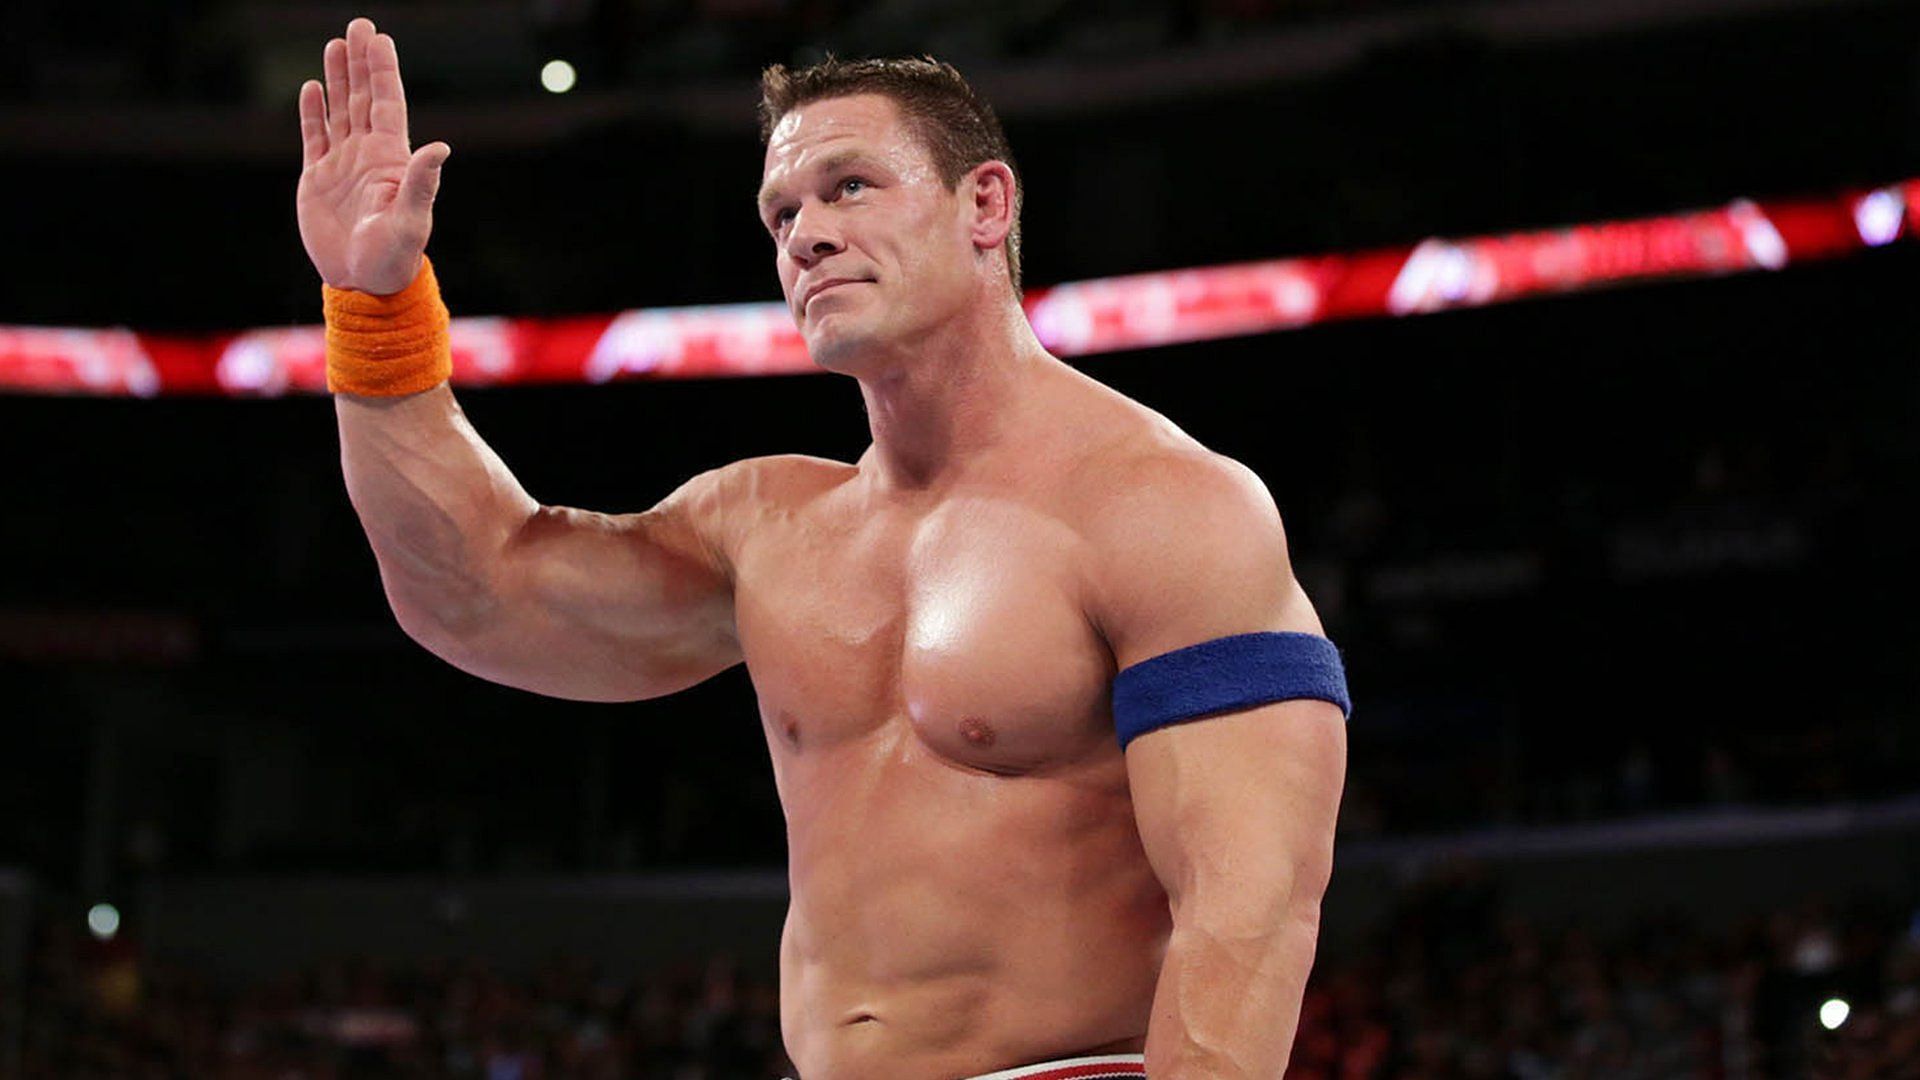 John Cena waves to the WWE Universe after a match